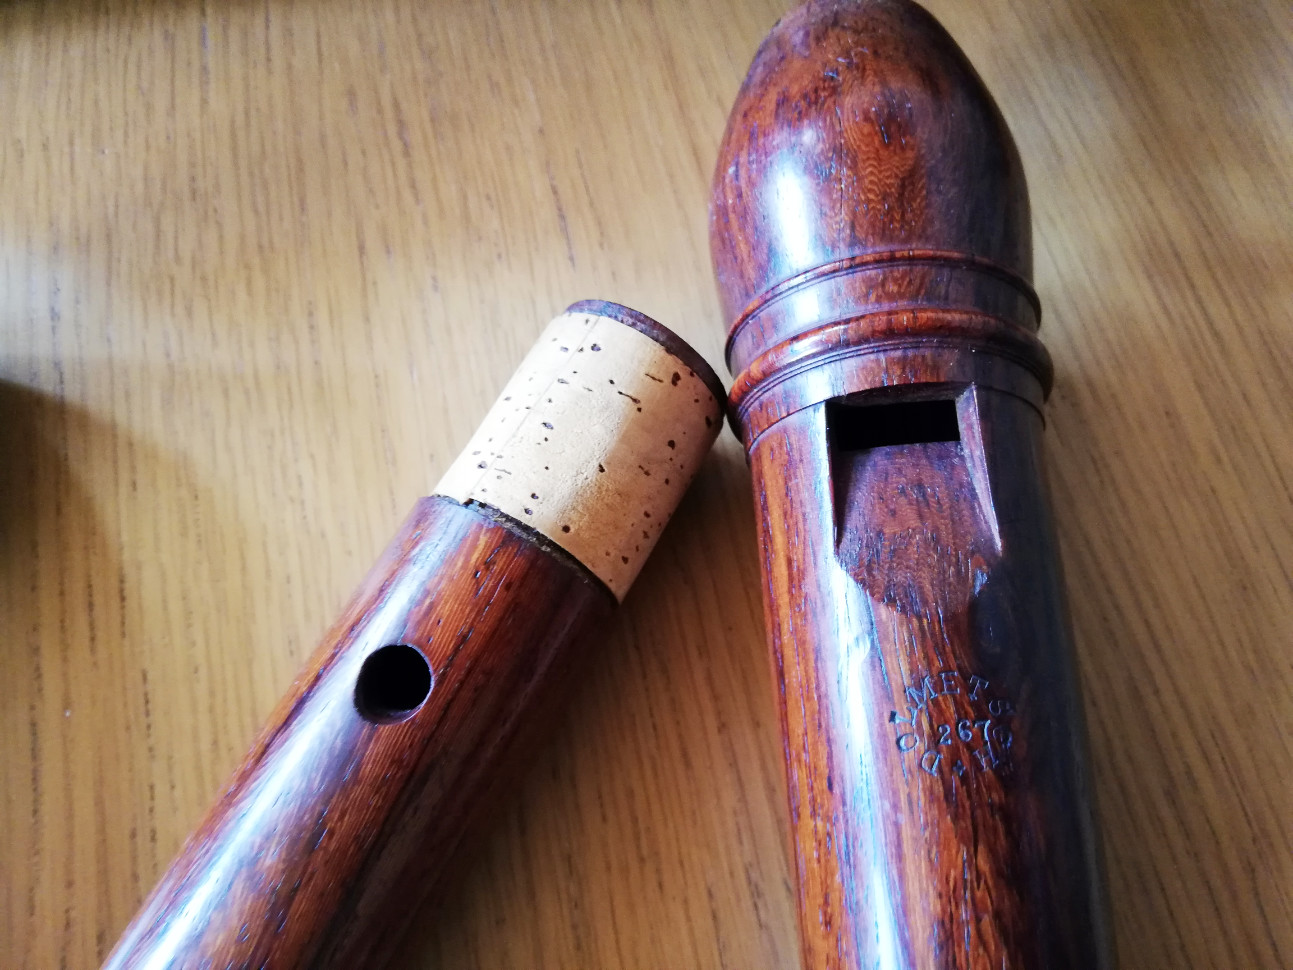 Dolmetsch 1924 tenor recorder after Stanesby \u2014 Recorders for Sale